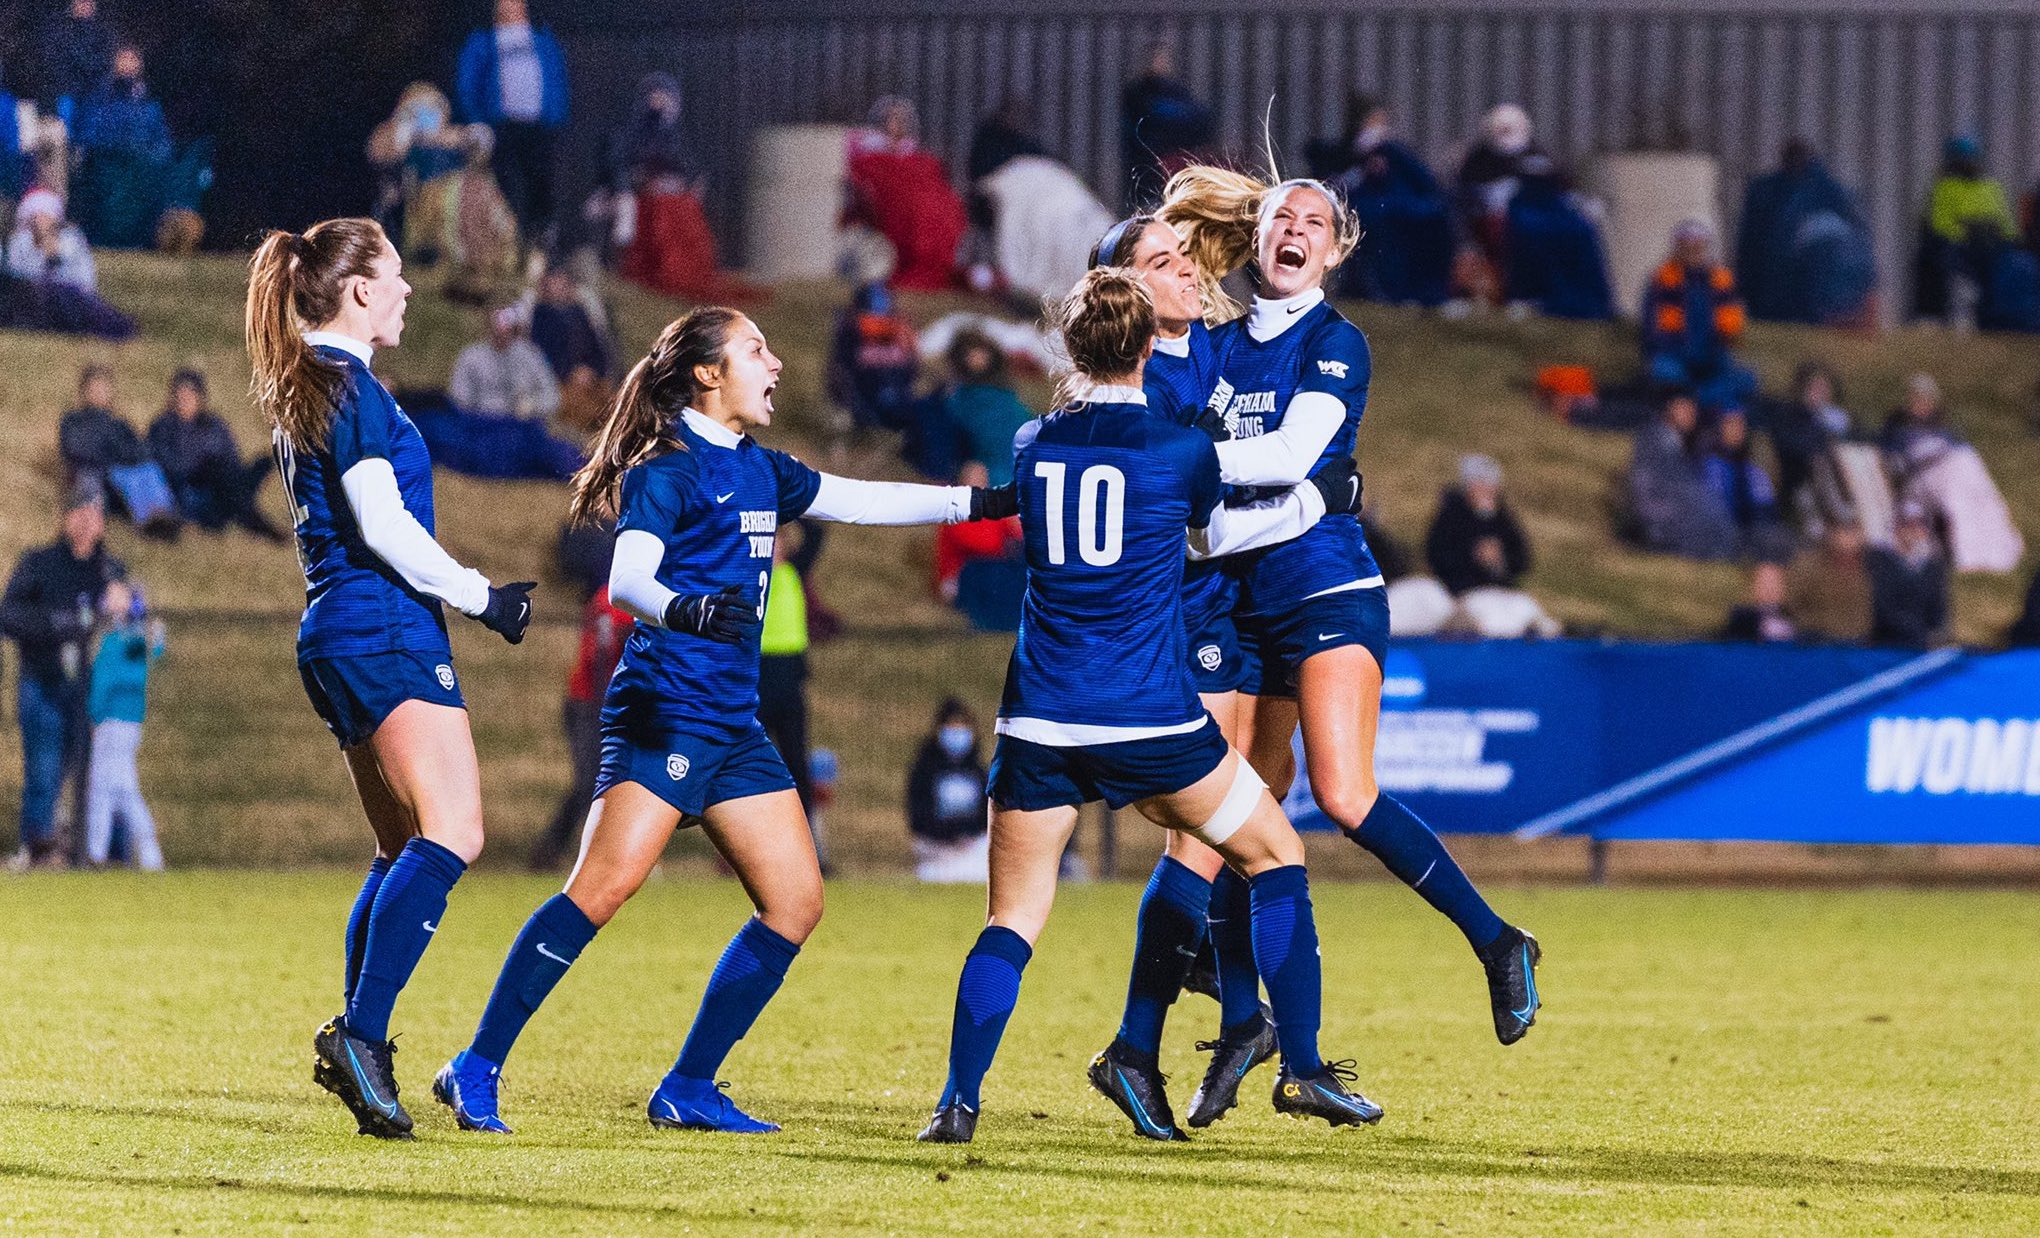 BYU women's soccer advances to Elite 8 with 10 upset over 1seed Virginia